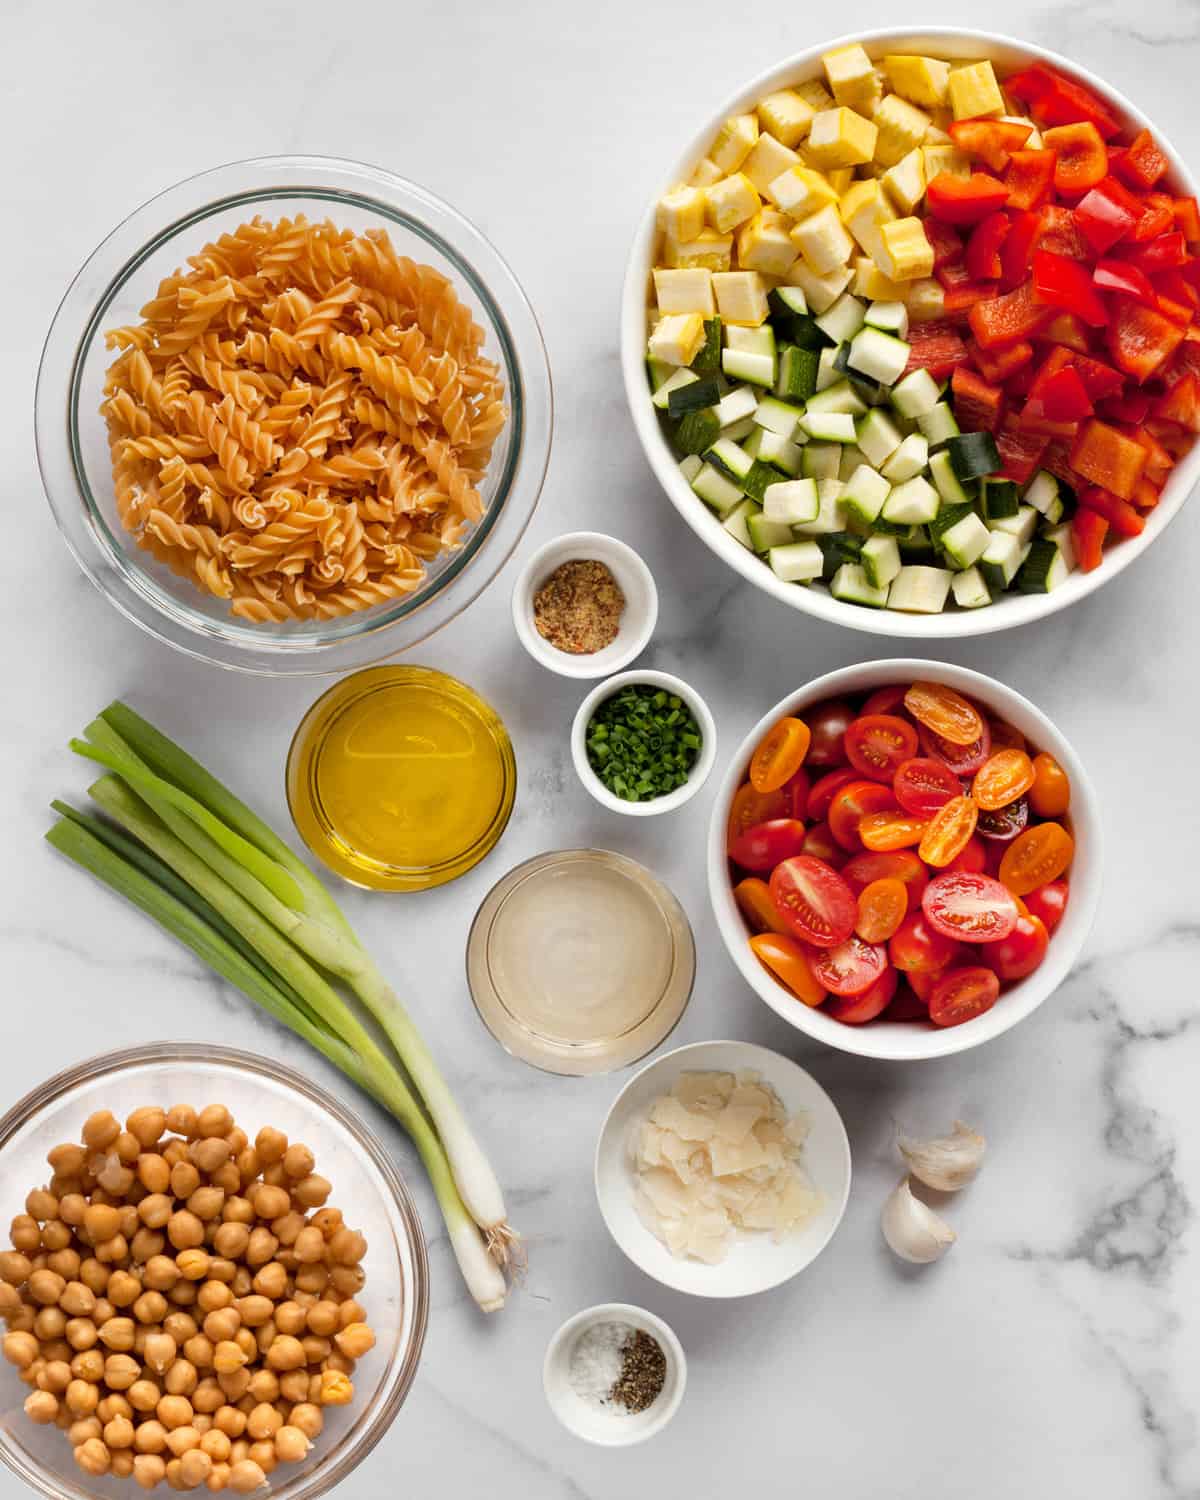 Ingredients including chickpea pasta, vegetables, chickpeas, vinegar, olive oil, garlic and scallions.